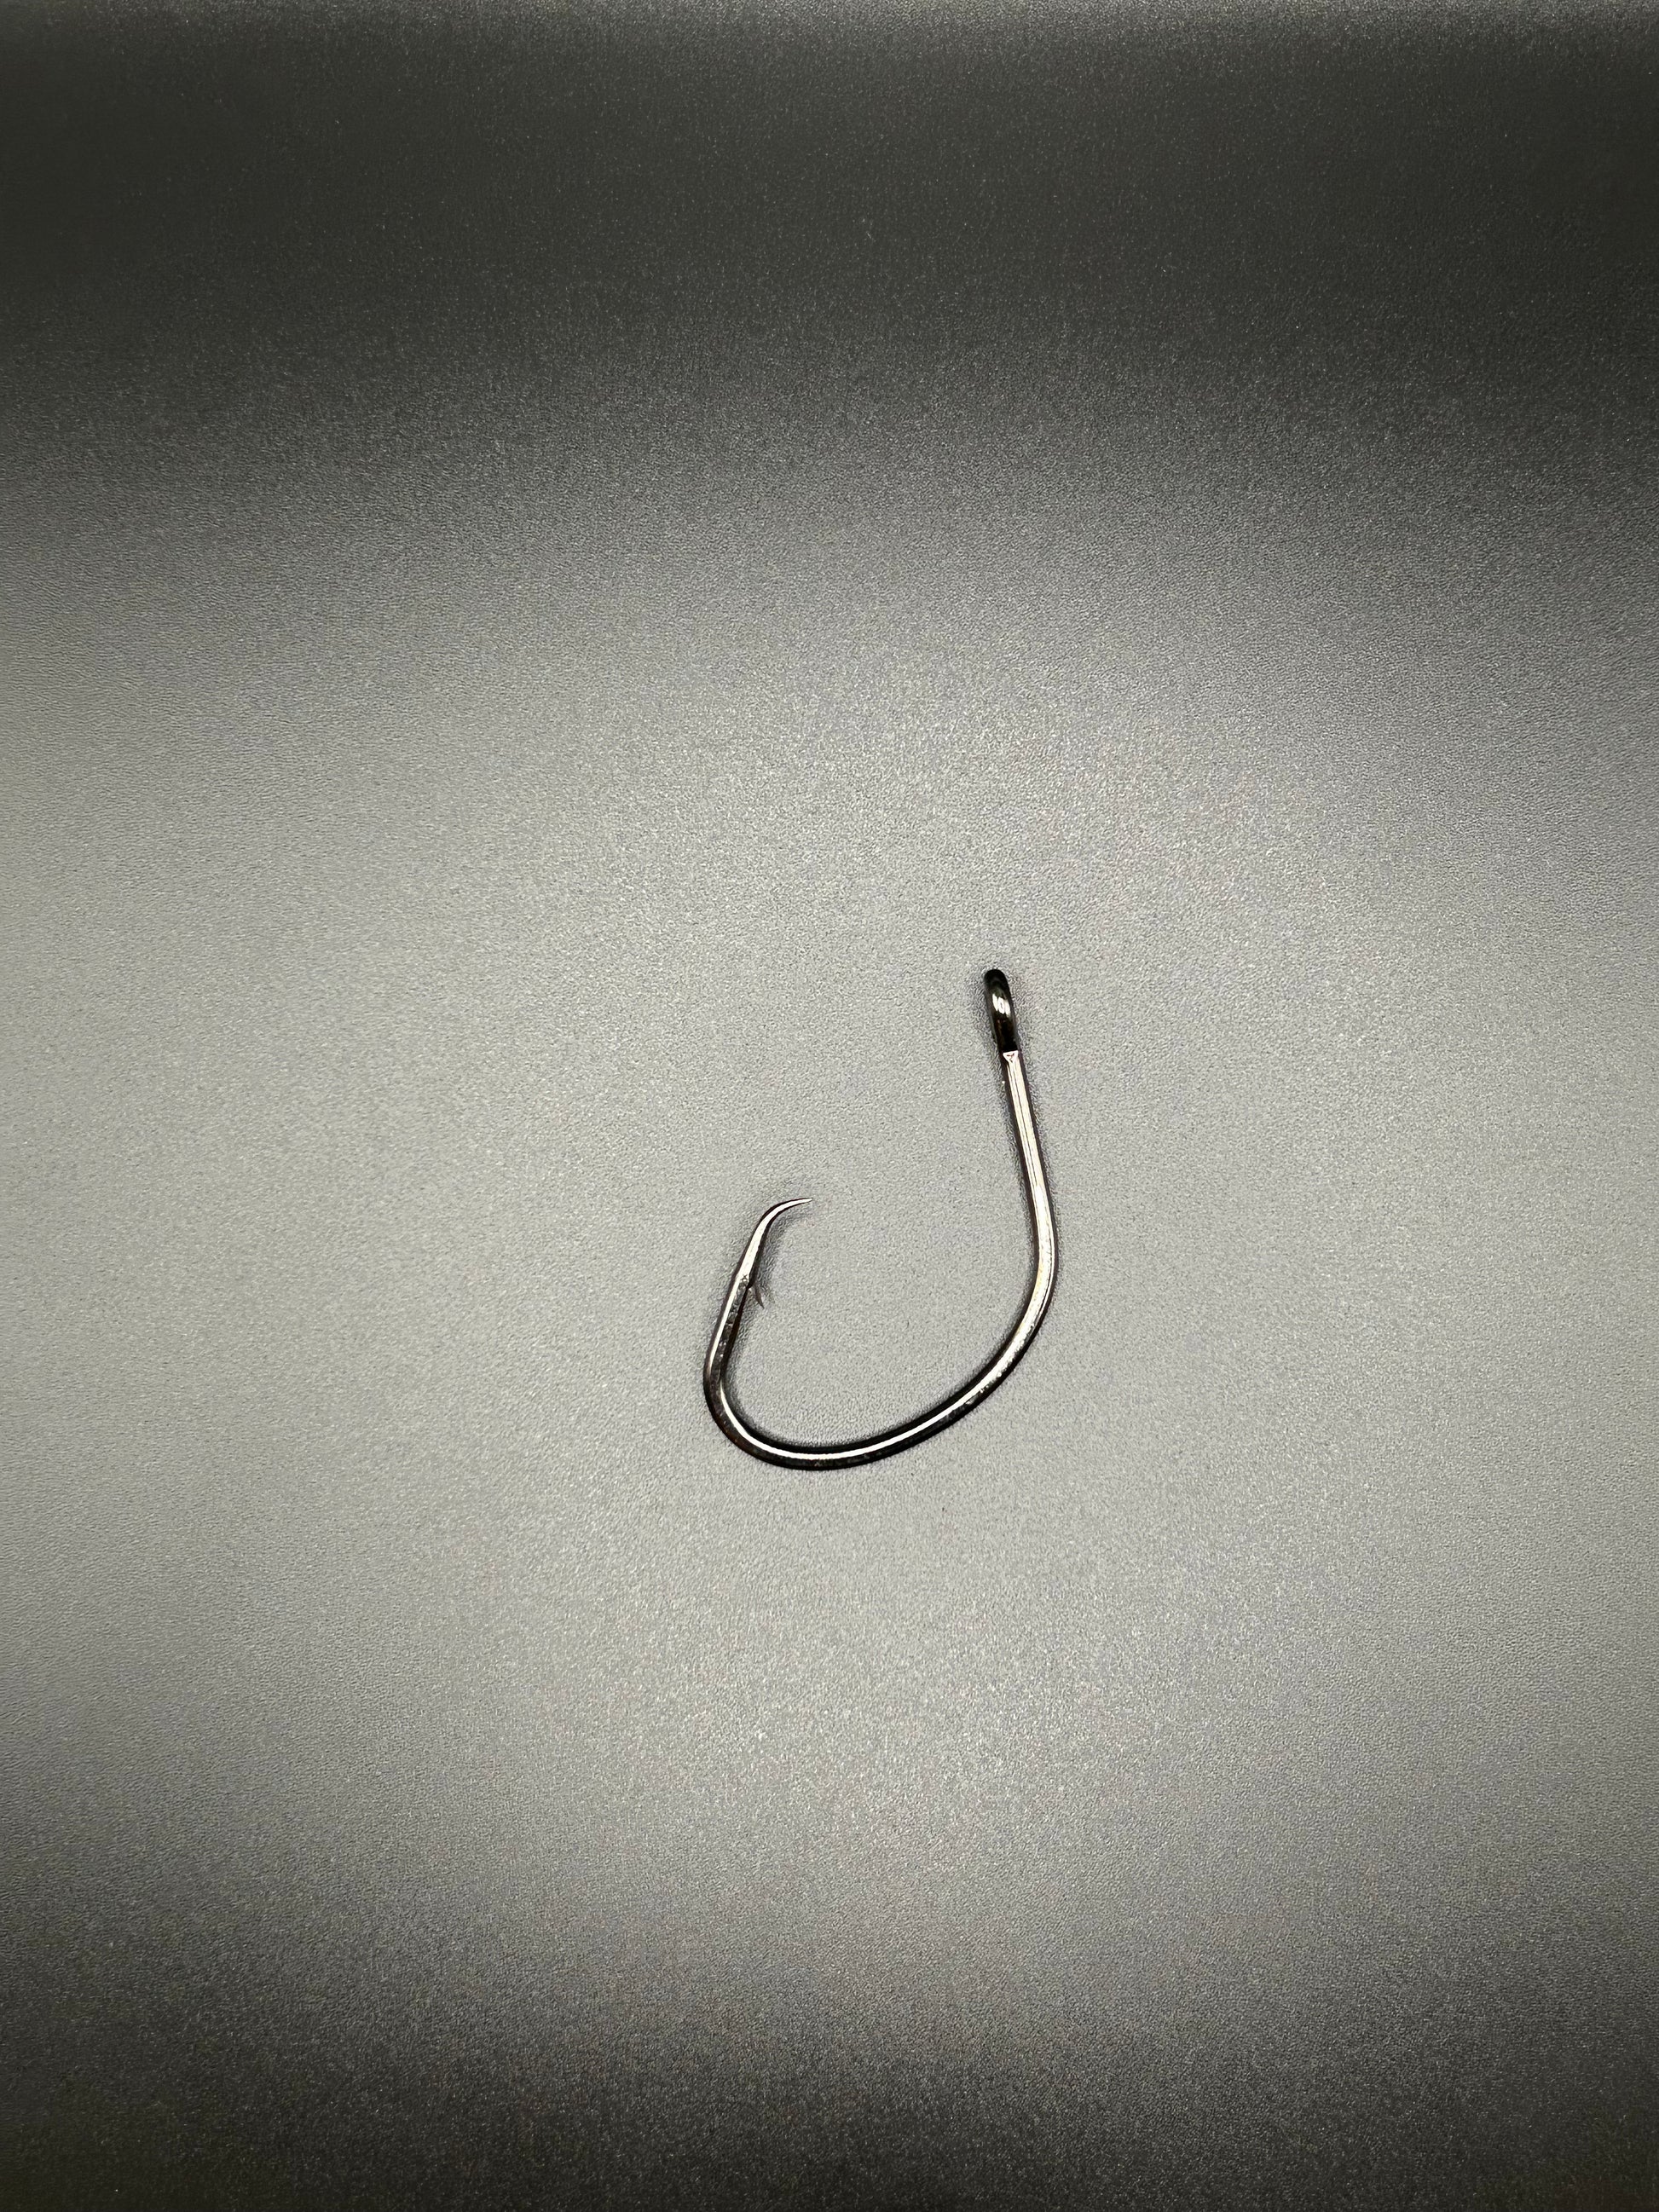 6 Vintage Genuine Tro Tac Snelled Hooks Size 4-0 Fishing Collectible -   Canada